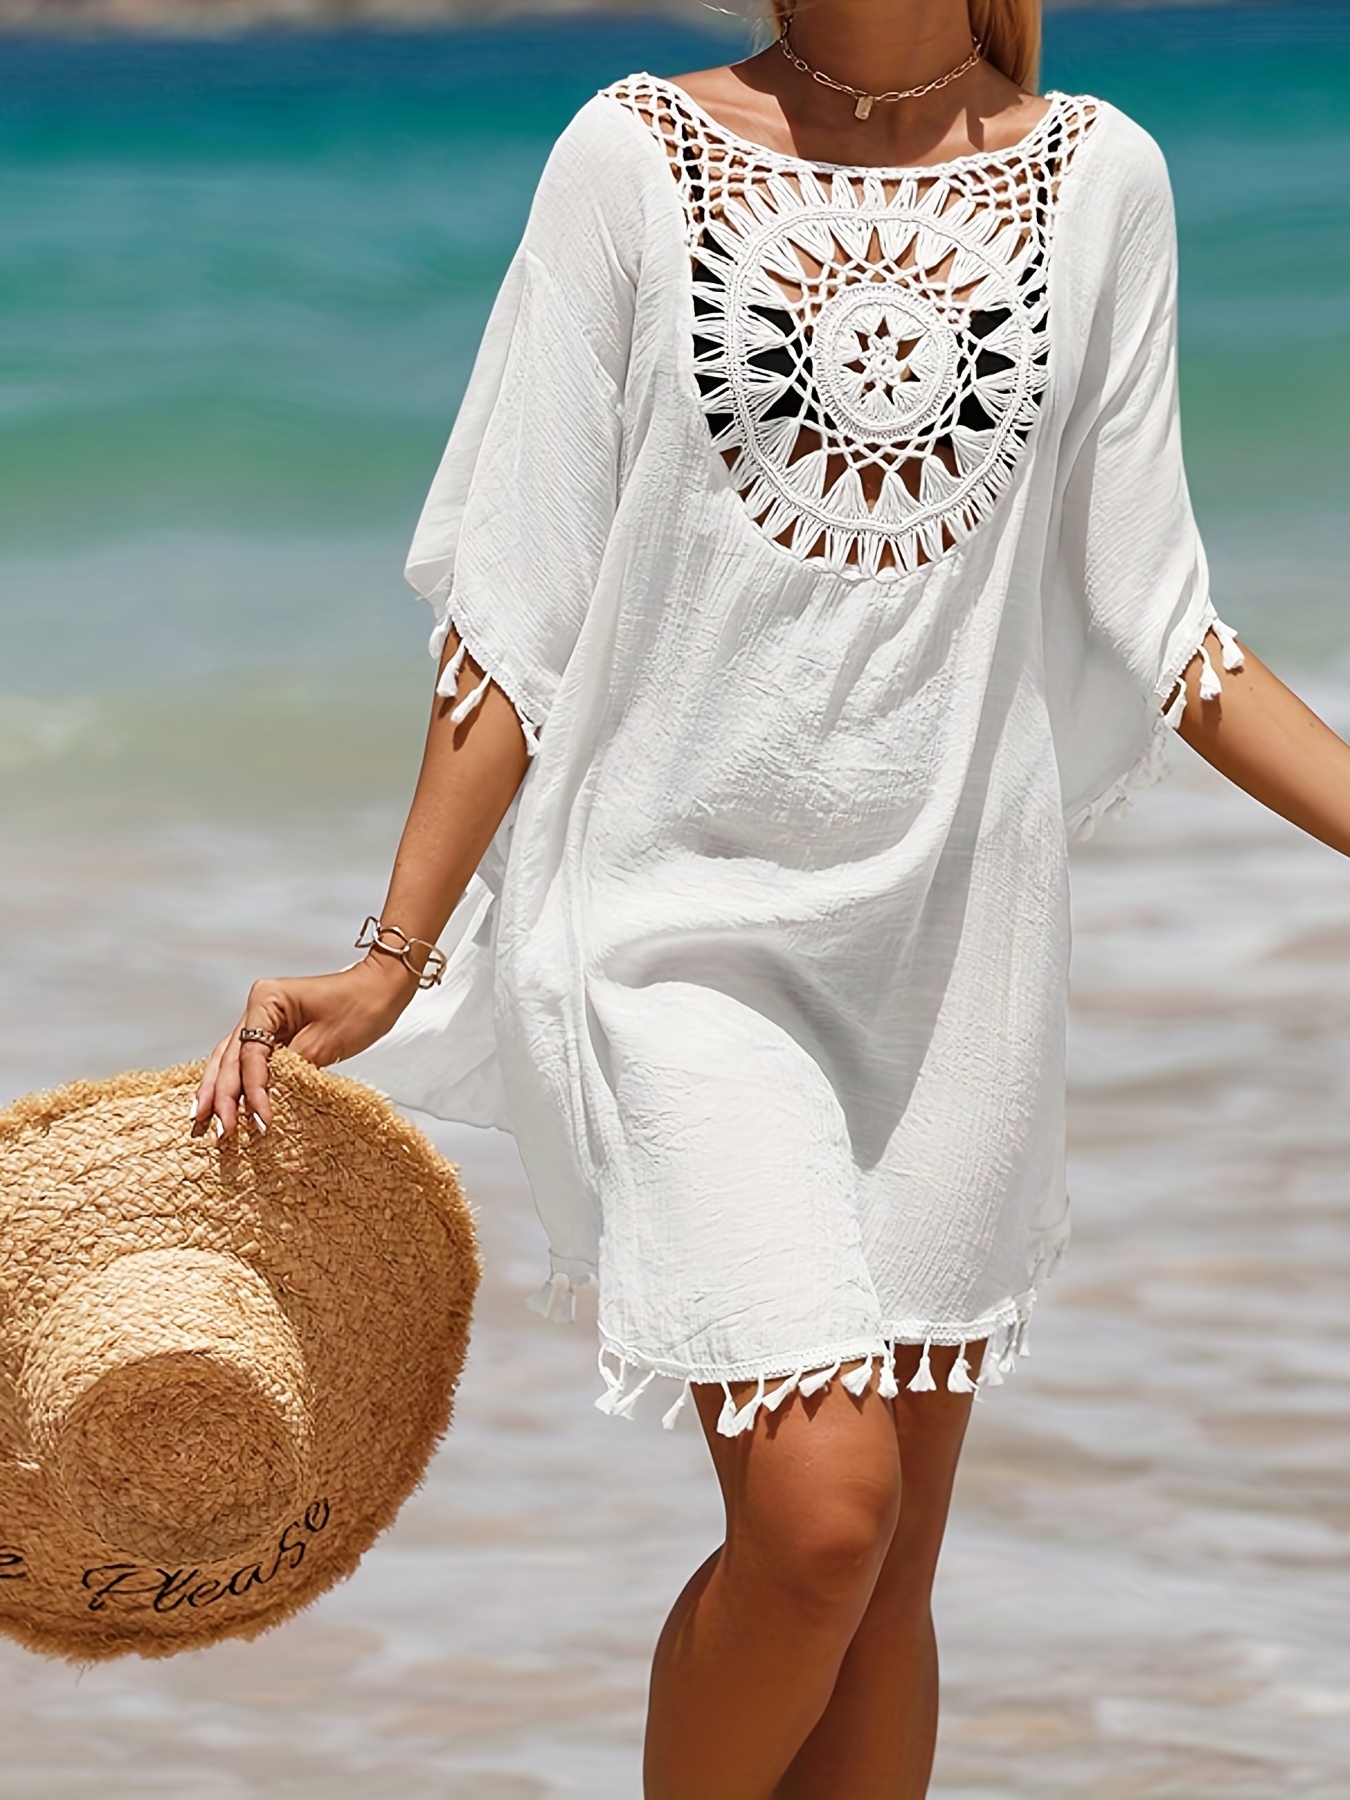 CUHAKCI 2018 Boho Style Women's Cover Up White Lace Hollow Crochet